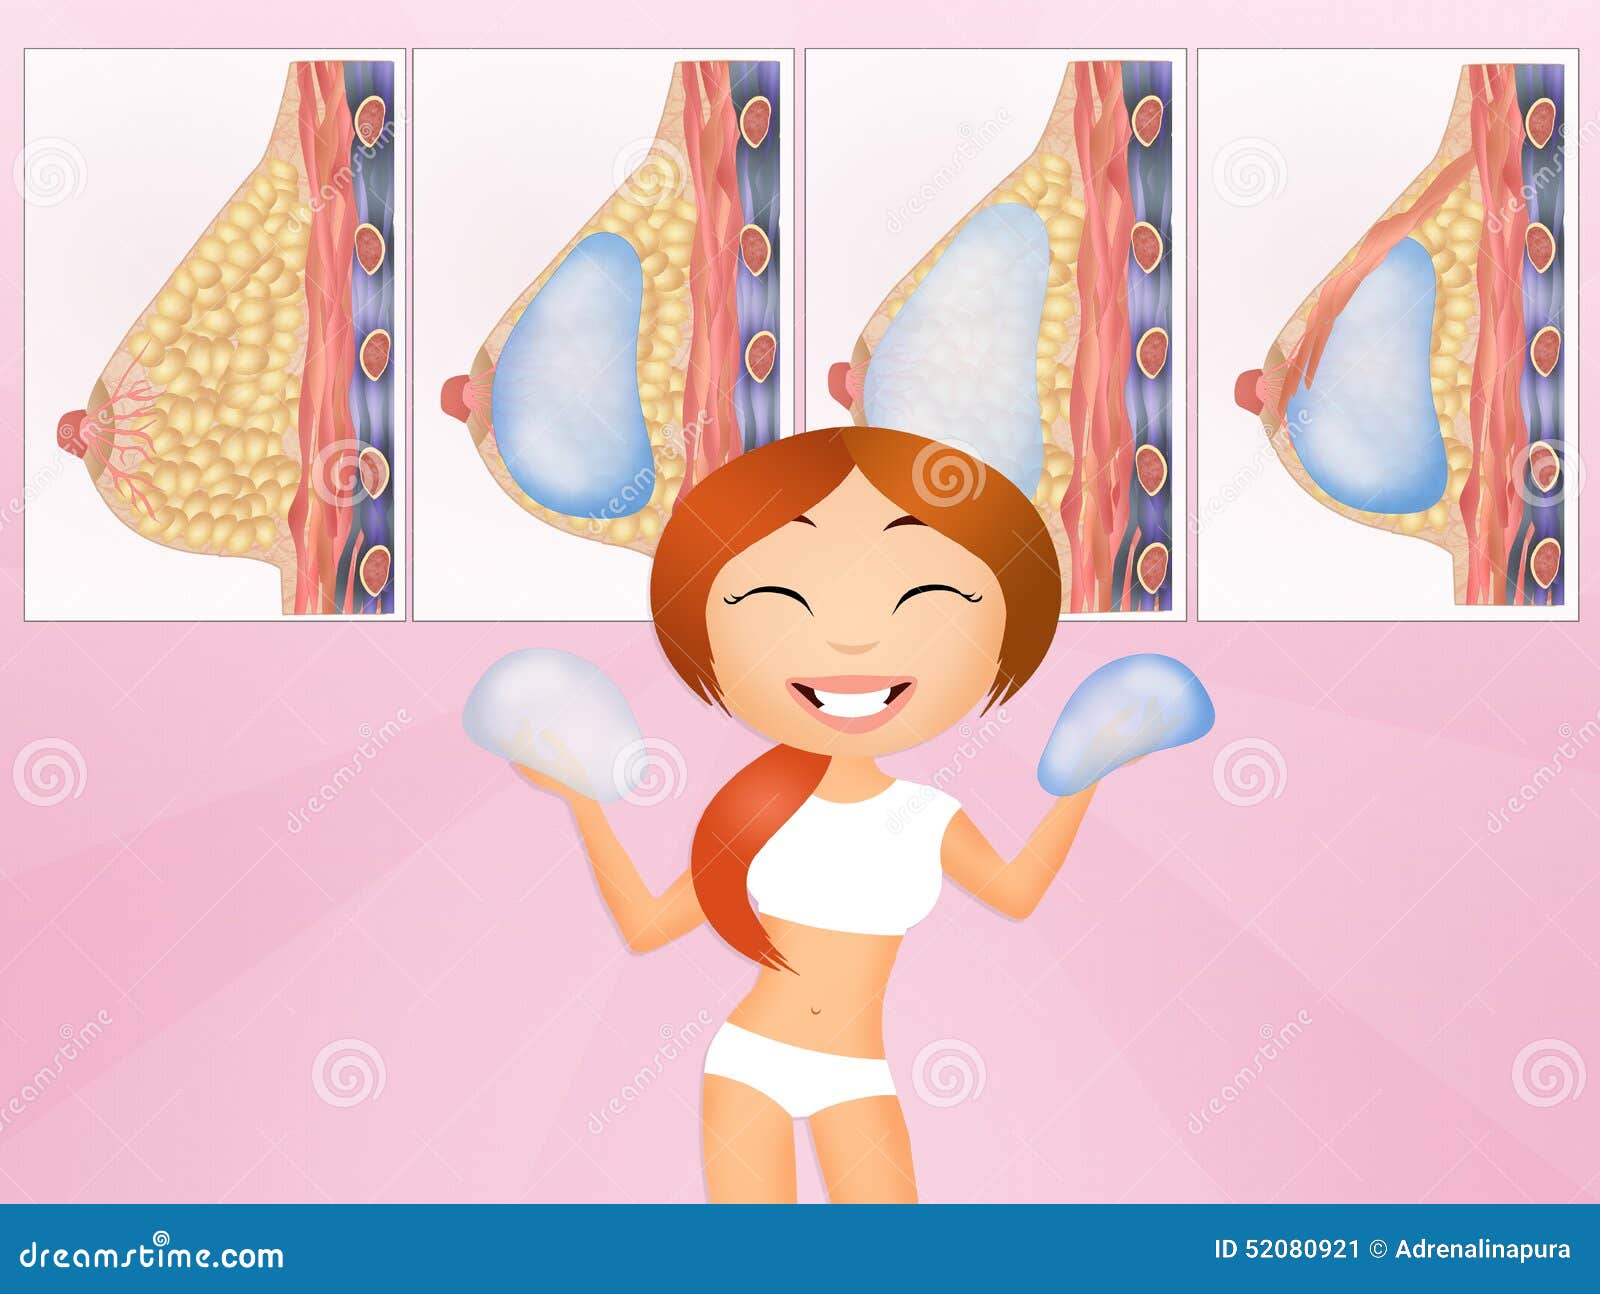 Female Breast Surgery Infographic Chart. Vector Flat Medical Illustration.  Set Of Human Breast Before And After With Different Implant On White  Background. Subglandular And Subpectorial Type. Royalty Free SVG, Cliparts,  Vectors, and